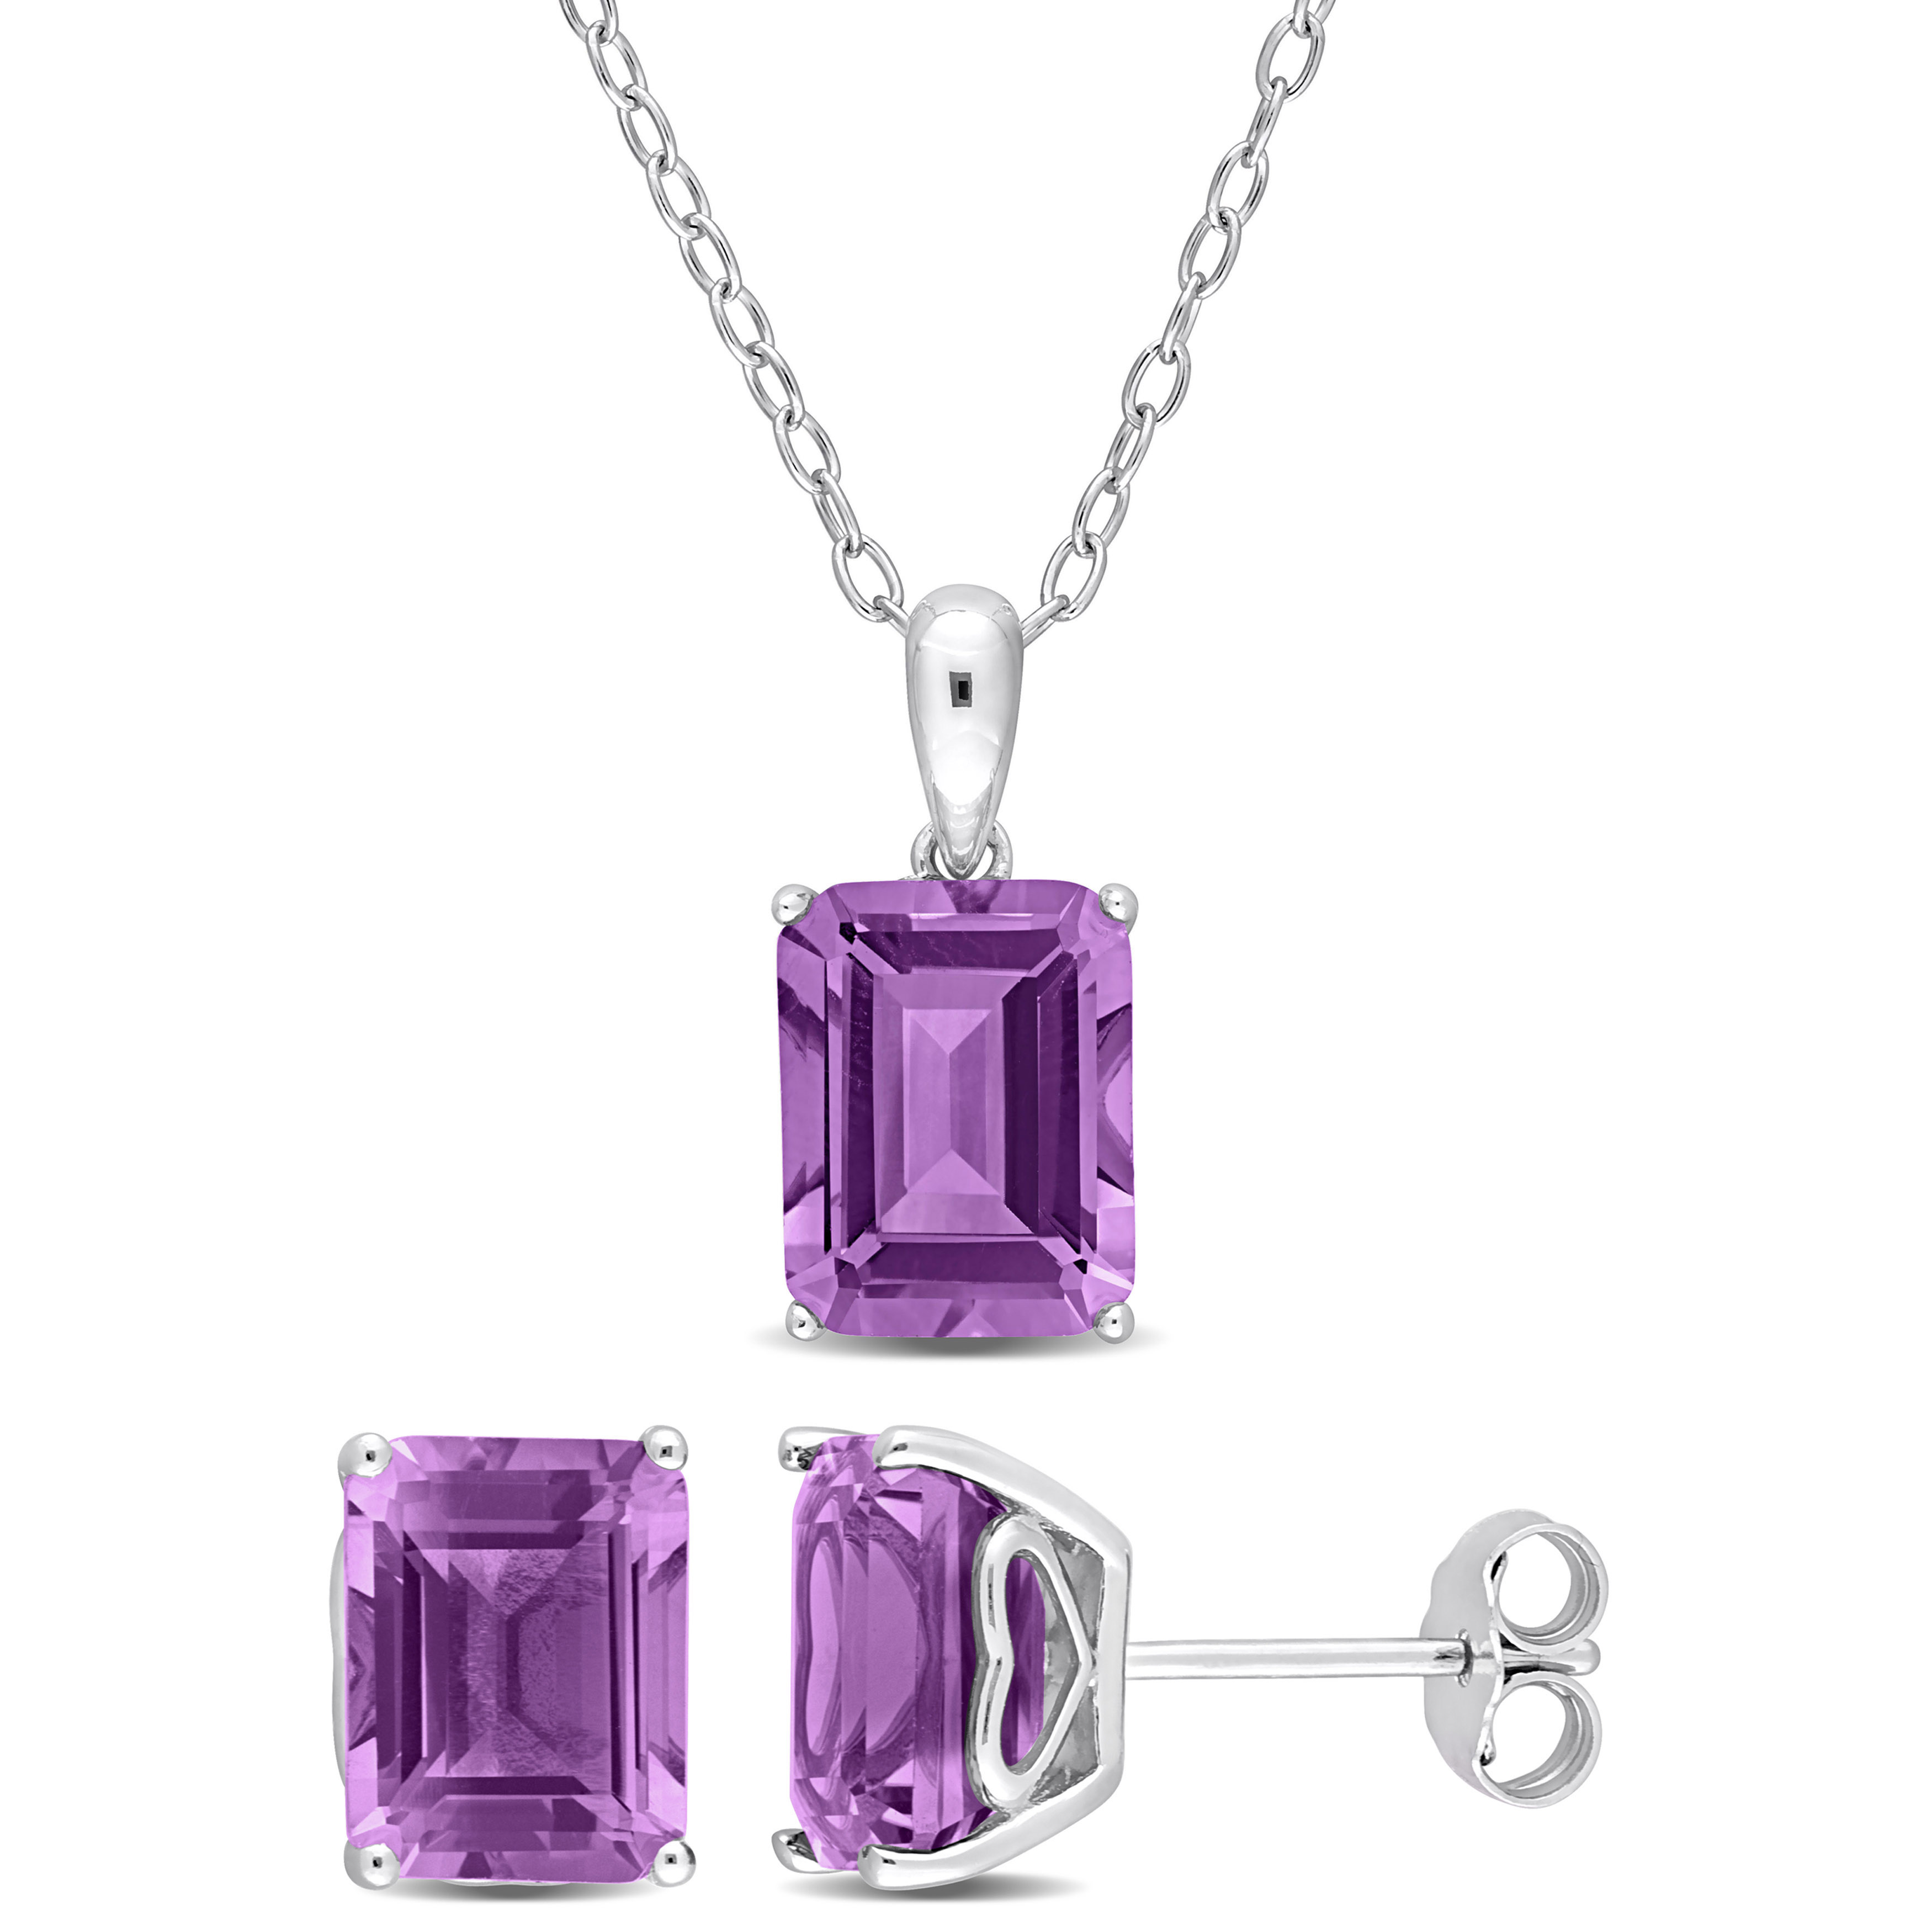 6 5/8 CT TGW Emerald-Cut and Octagon Amethyst 2-Piece Set of Pendant with Chain and Earrings in Sterling Silver